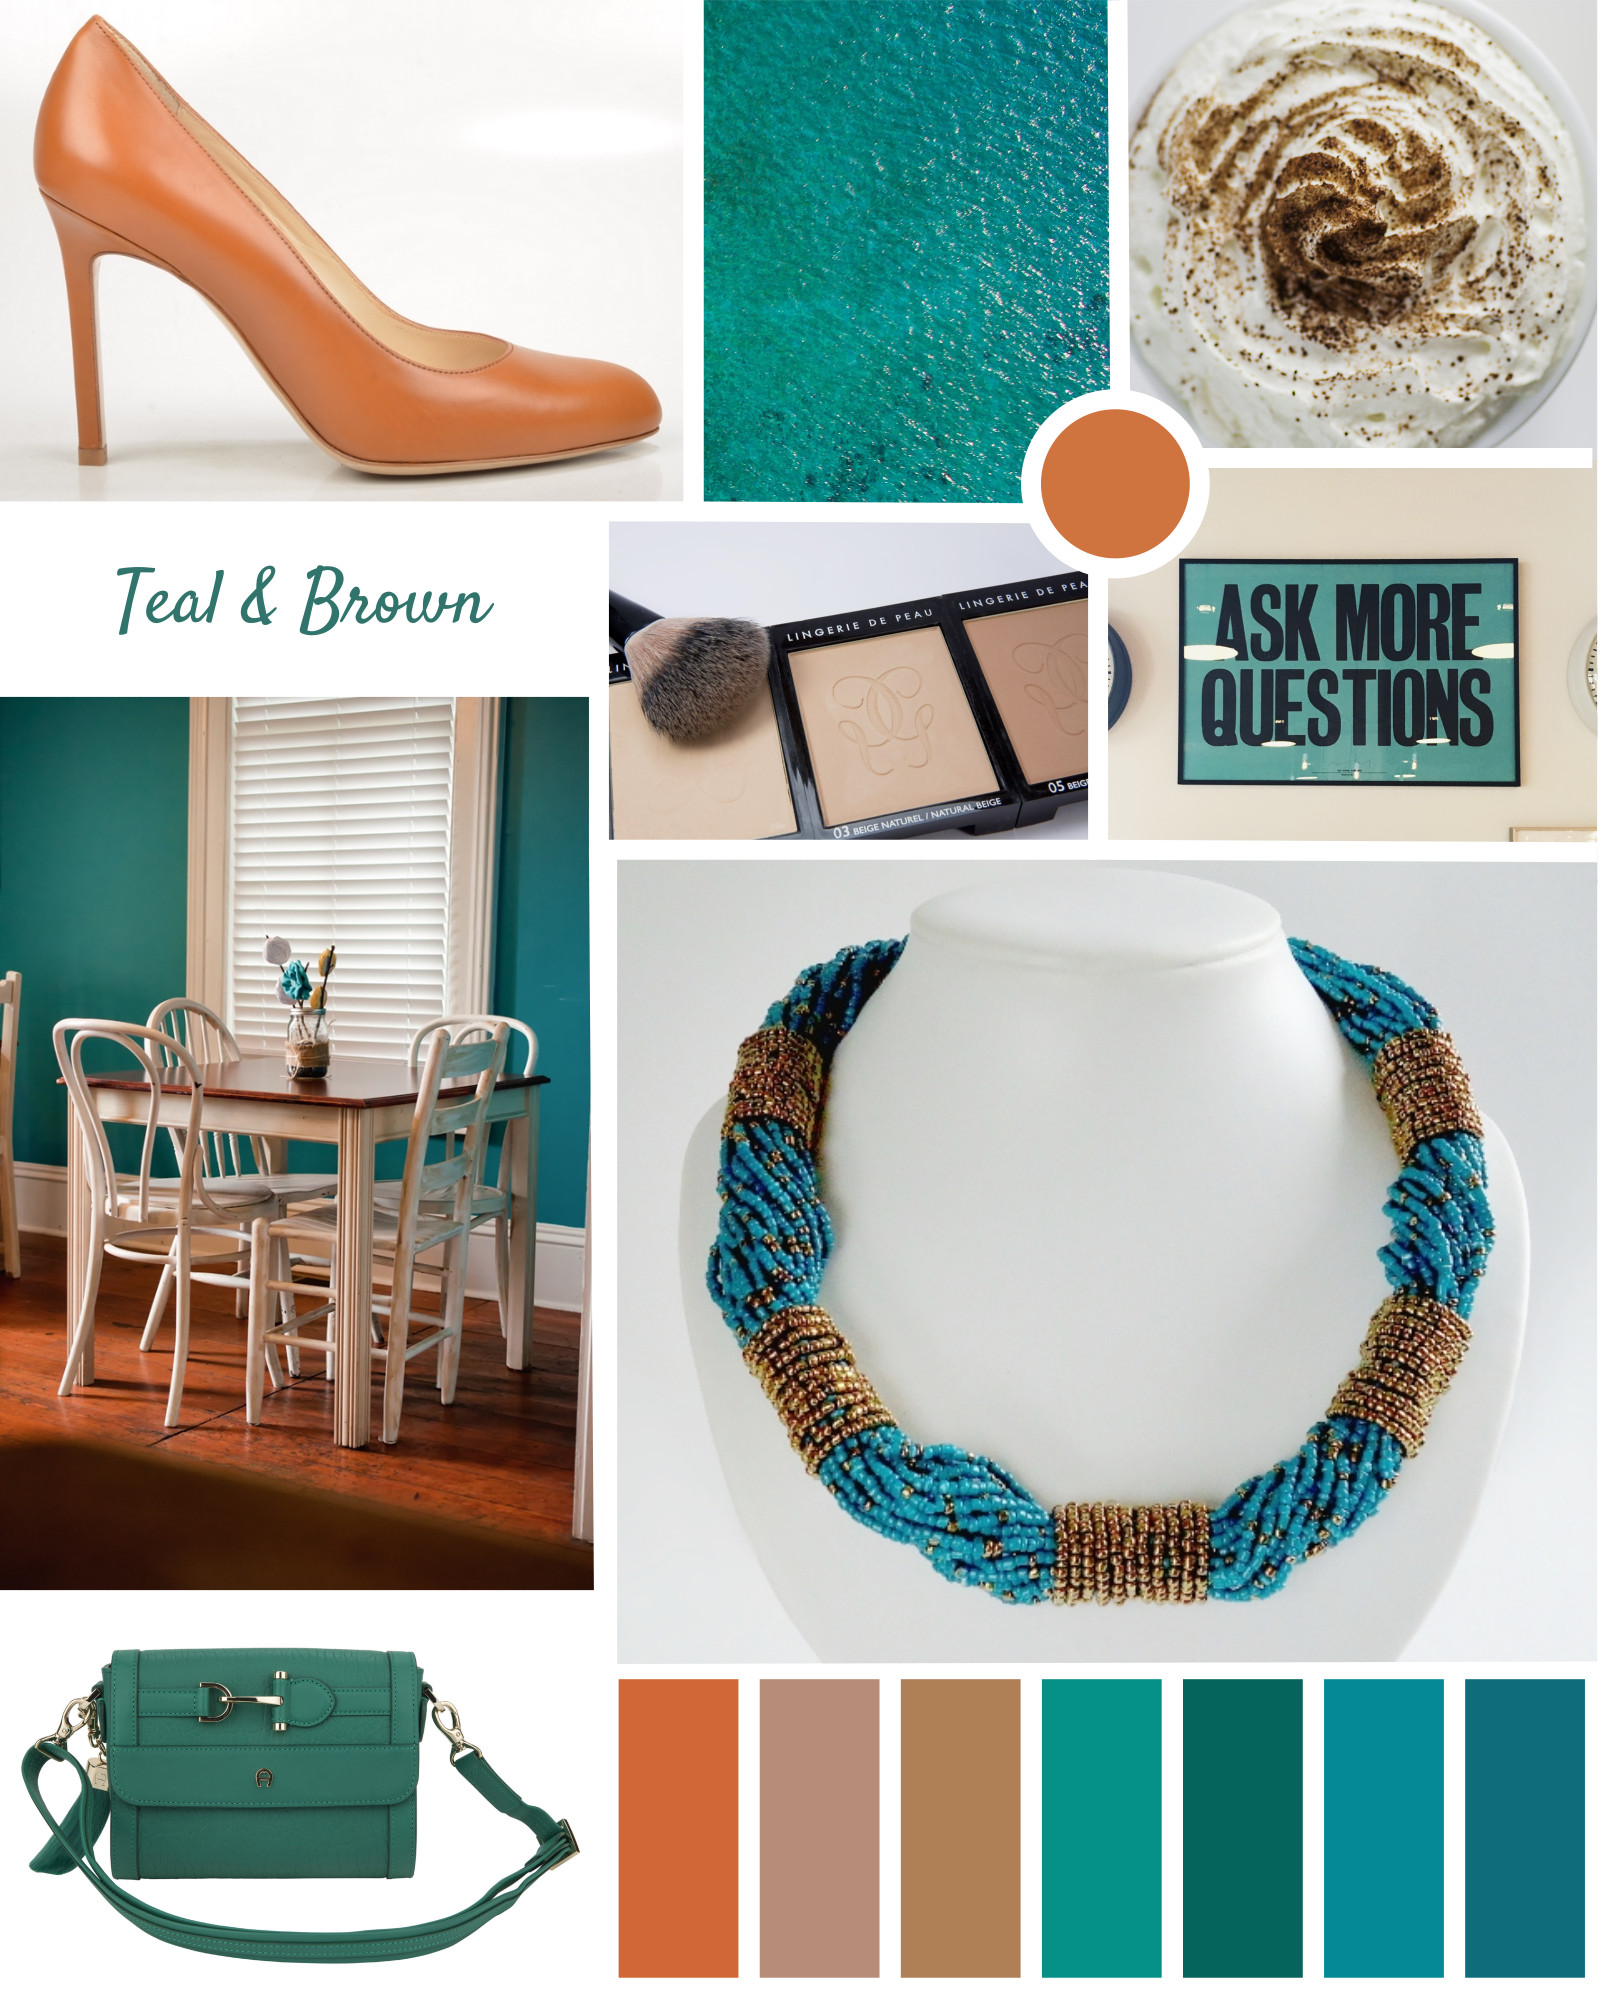 Teal & Brown Moodboard by HMJServices